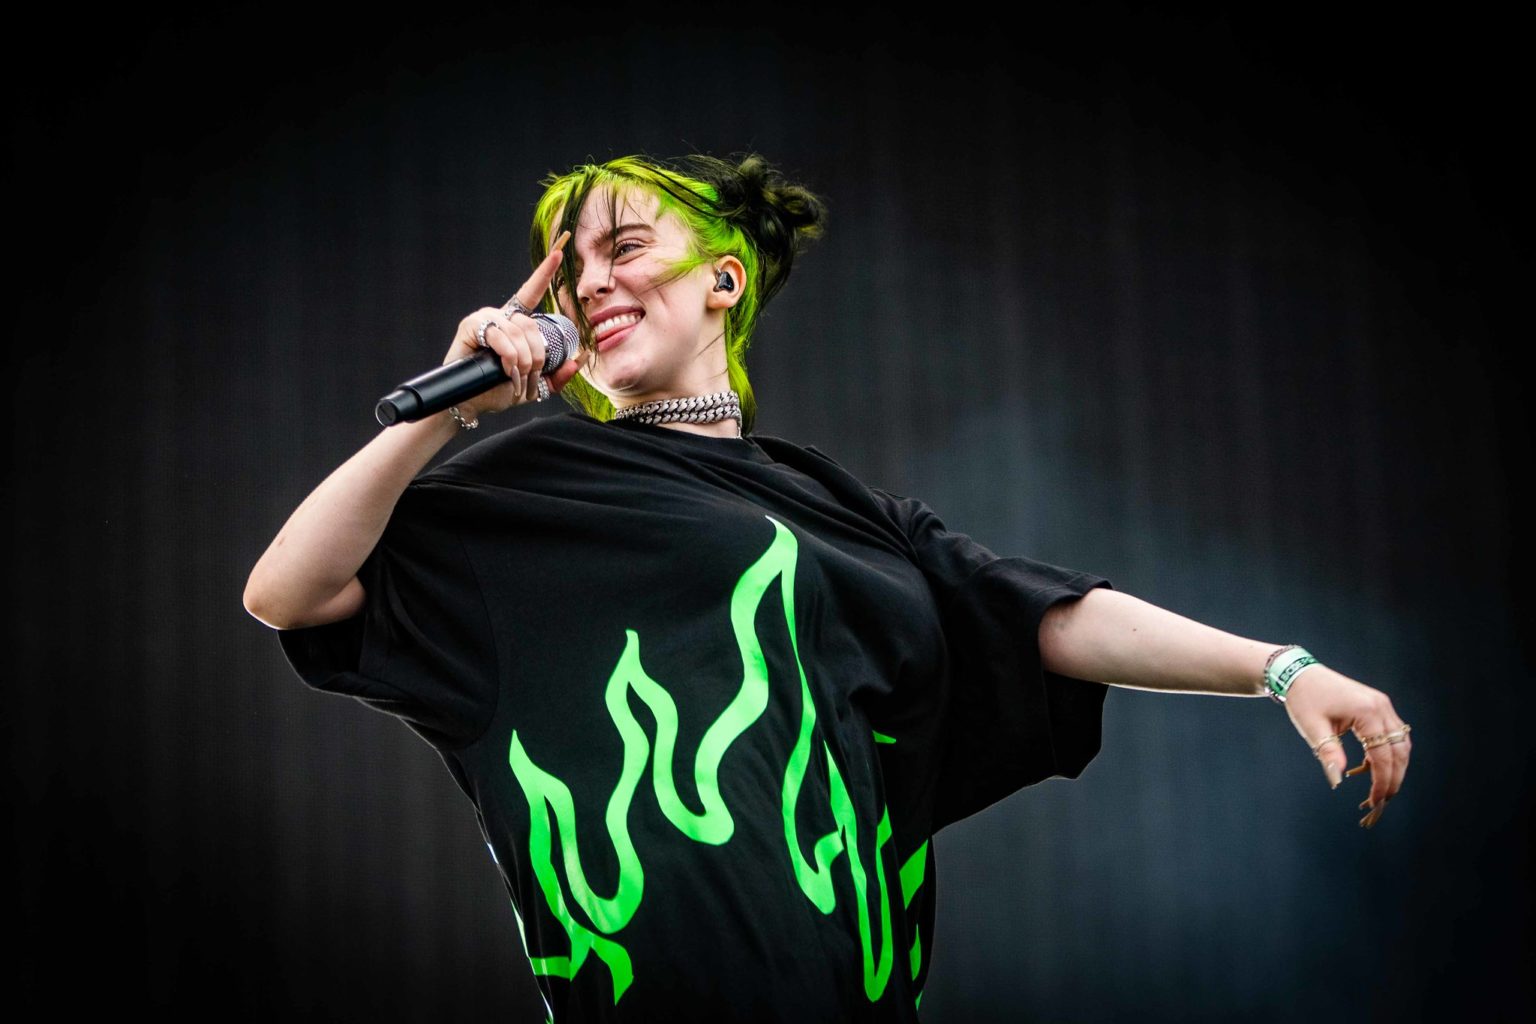 Billie Eilish and her father kick off a new radio show called 